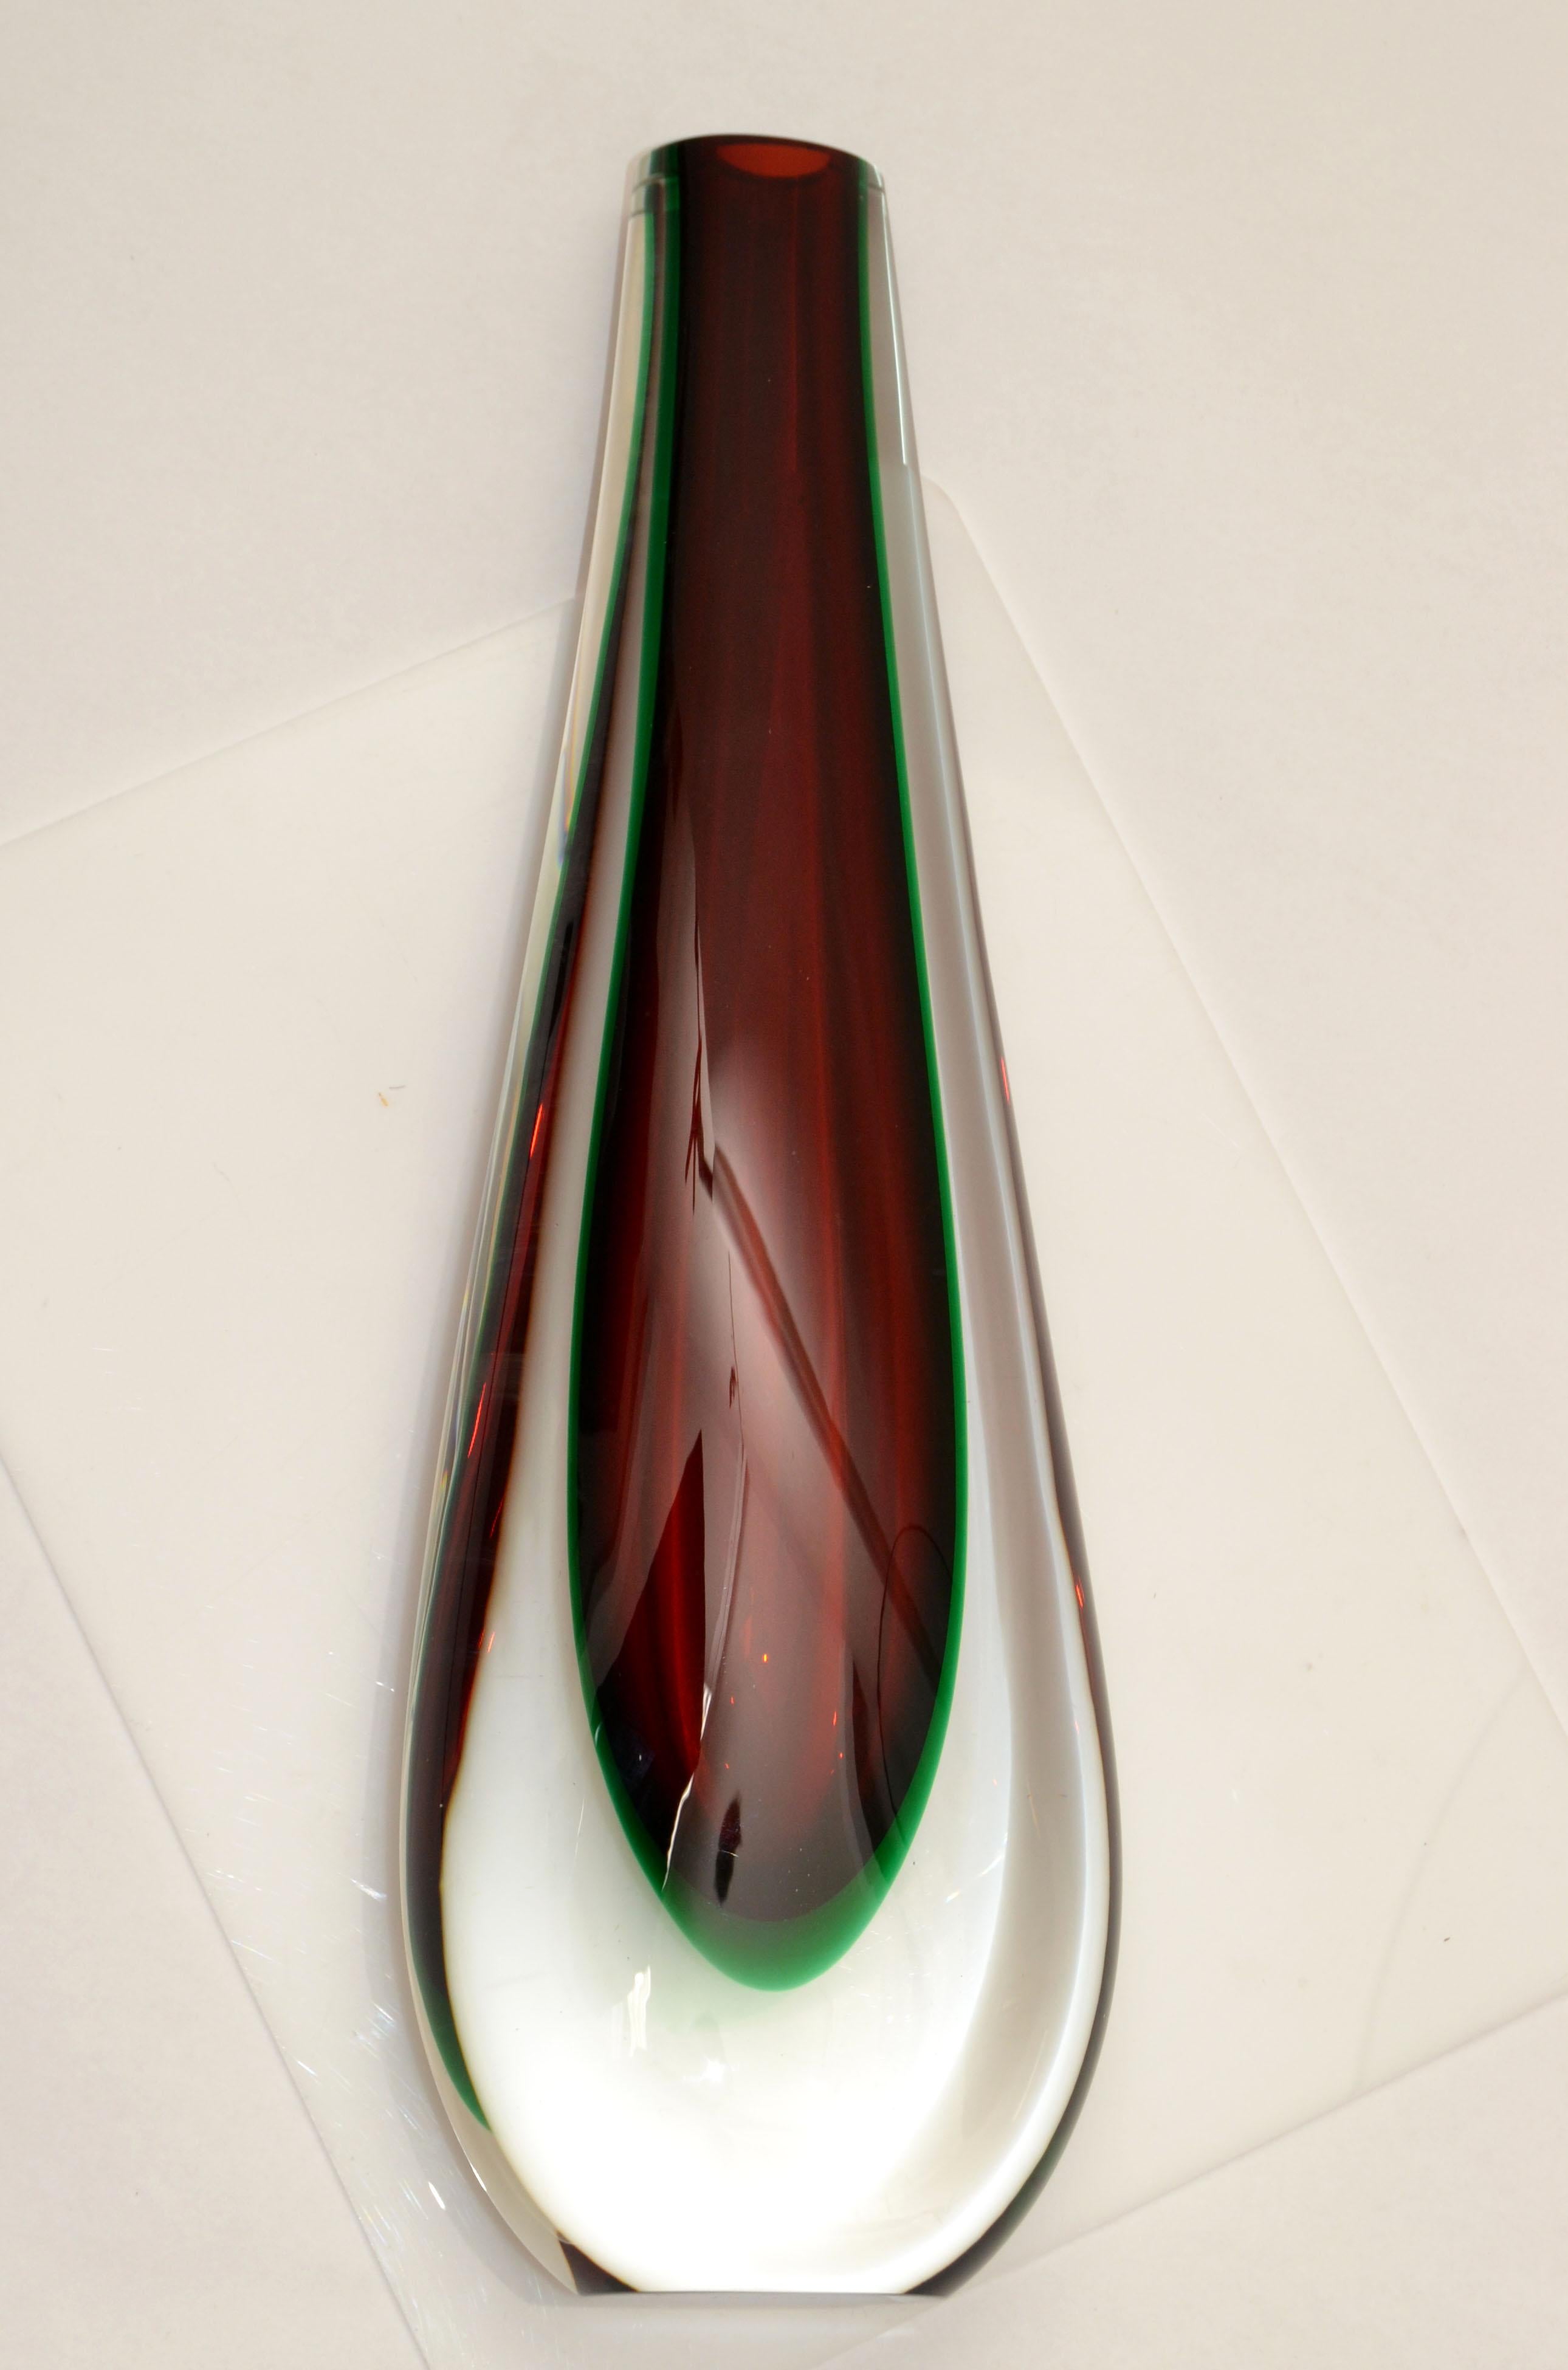 Mid-20th Century Flavio Poli Sommerso Murano Glass Vase 3 Encased Colors Red, Green Clear Seguso  For Sale